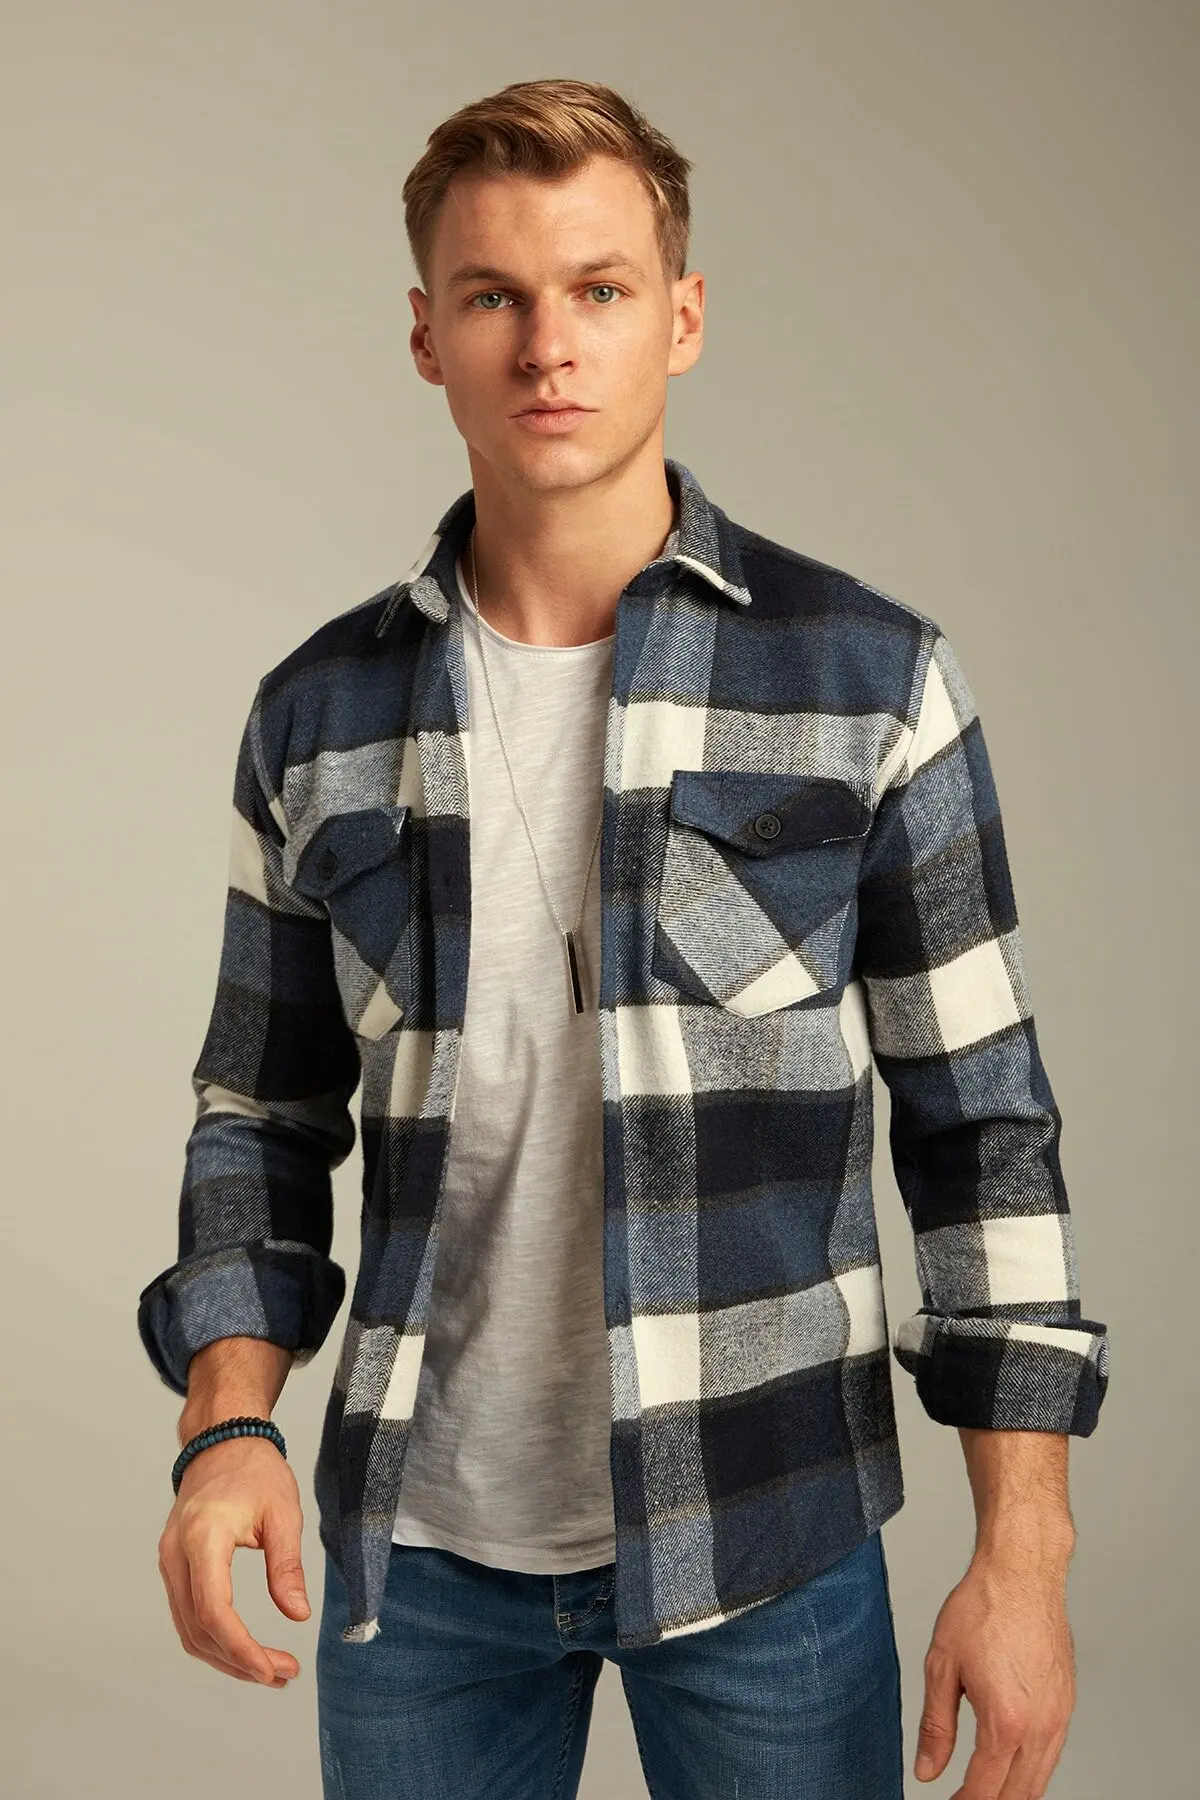 Mens Plaid Cotton Shirt 2021 Spring Autumn Winter Casual Long Sleeve Shirt Excellent Quality Male Shirt Soft Comfortable Topwear